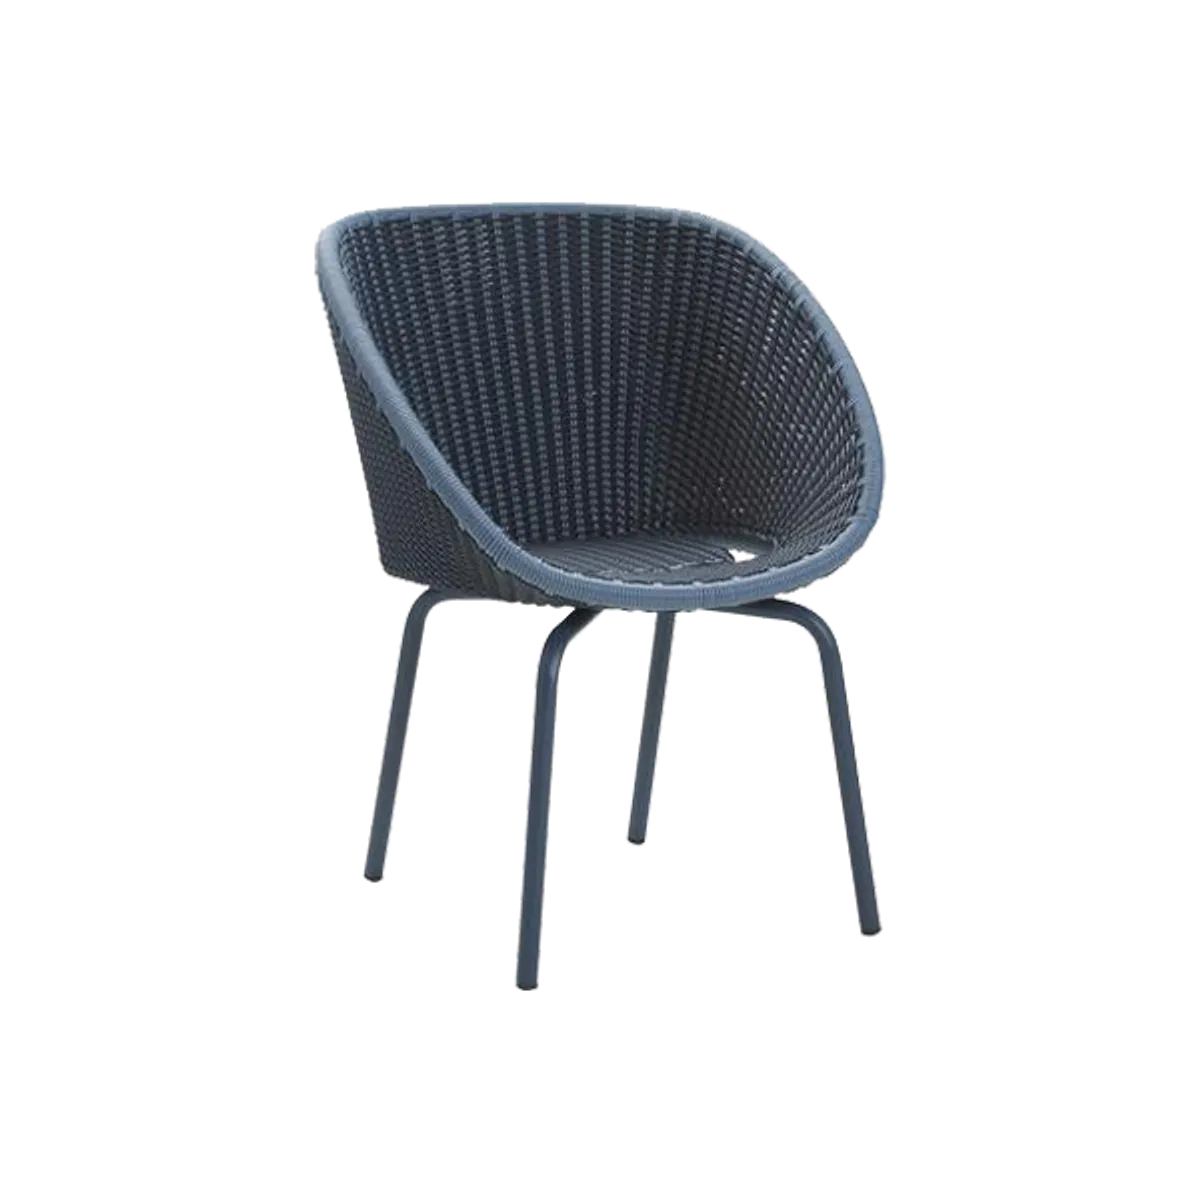 Persy weave chair_InsideOutContracts